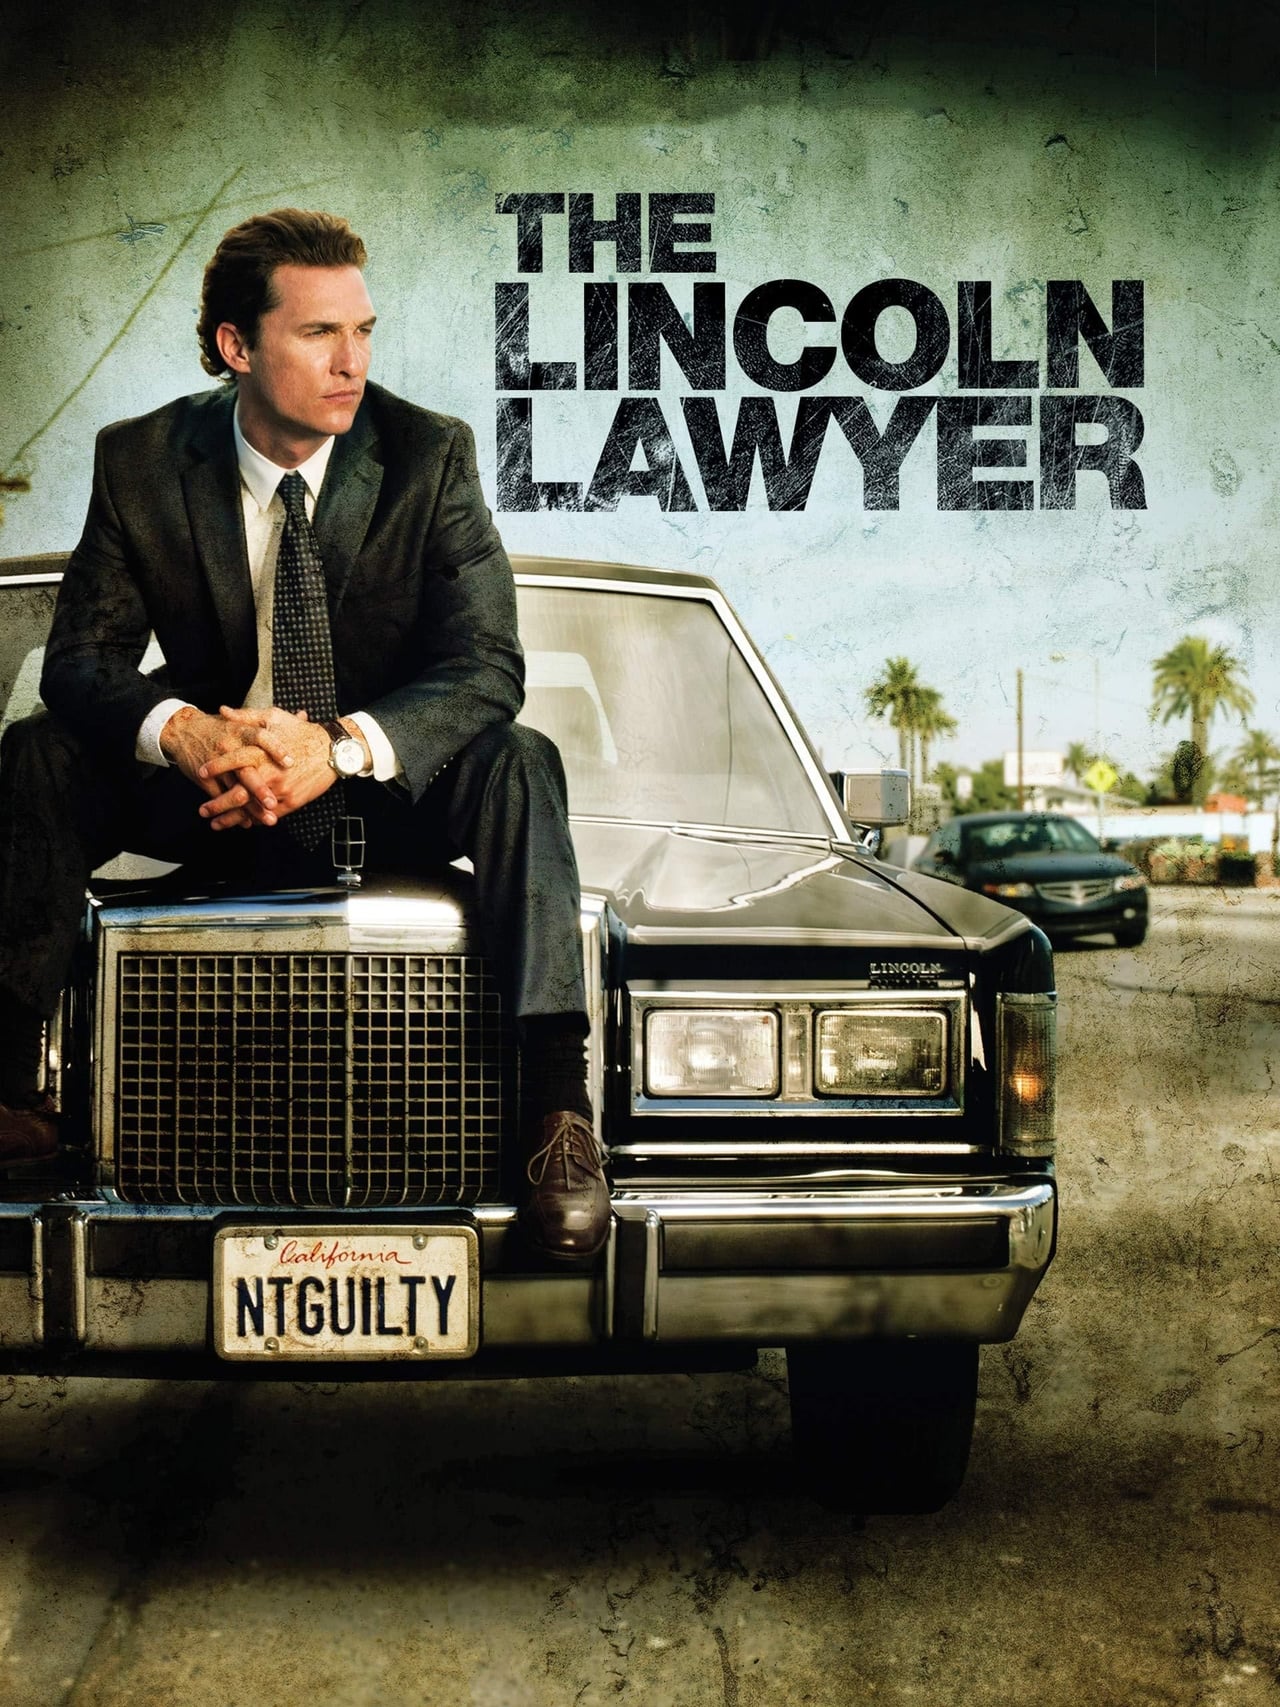 the lincoln lawyer movie download 480p